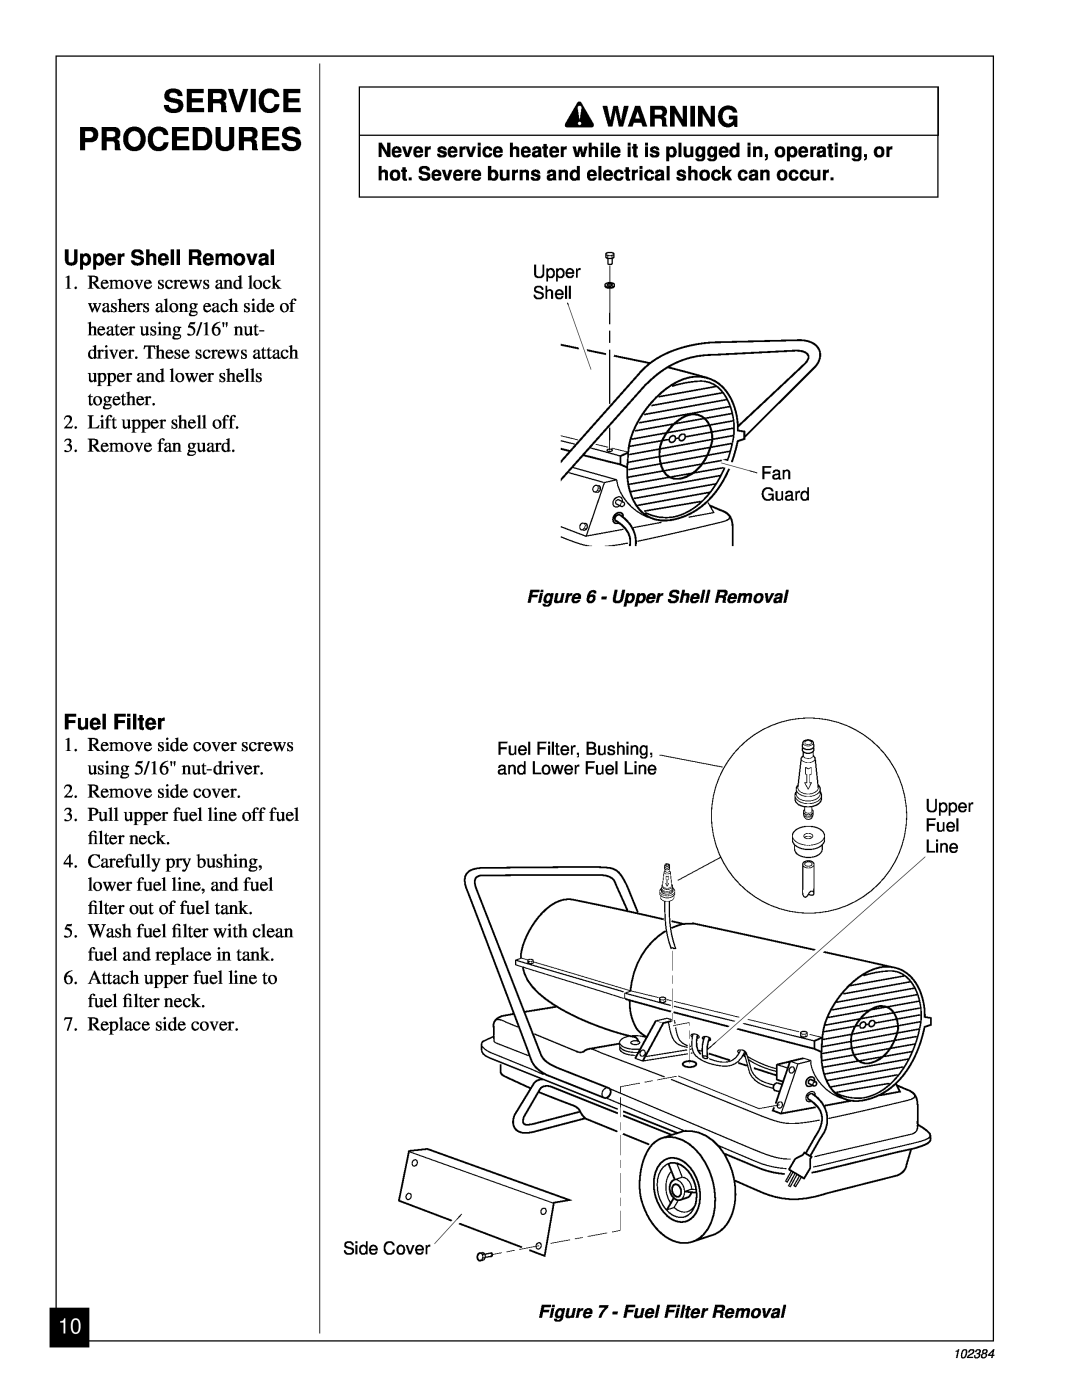 Master Lock BR150CE owner manual Service Procedures, Upper Shell Removal, Fuel Filter 